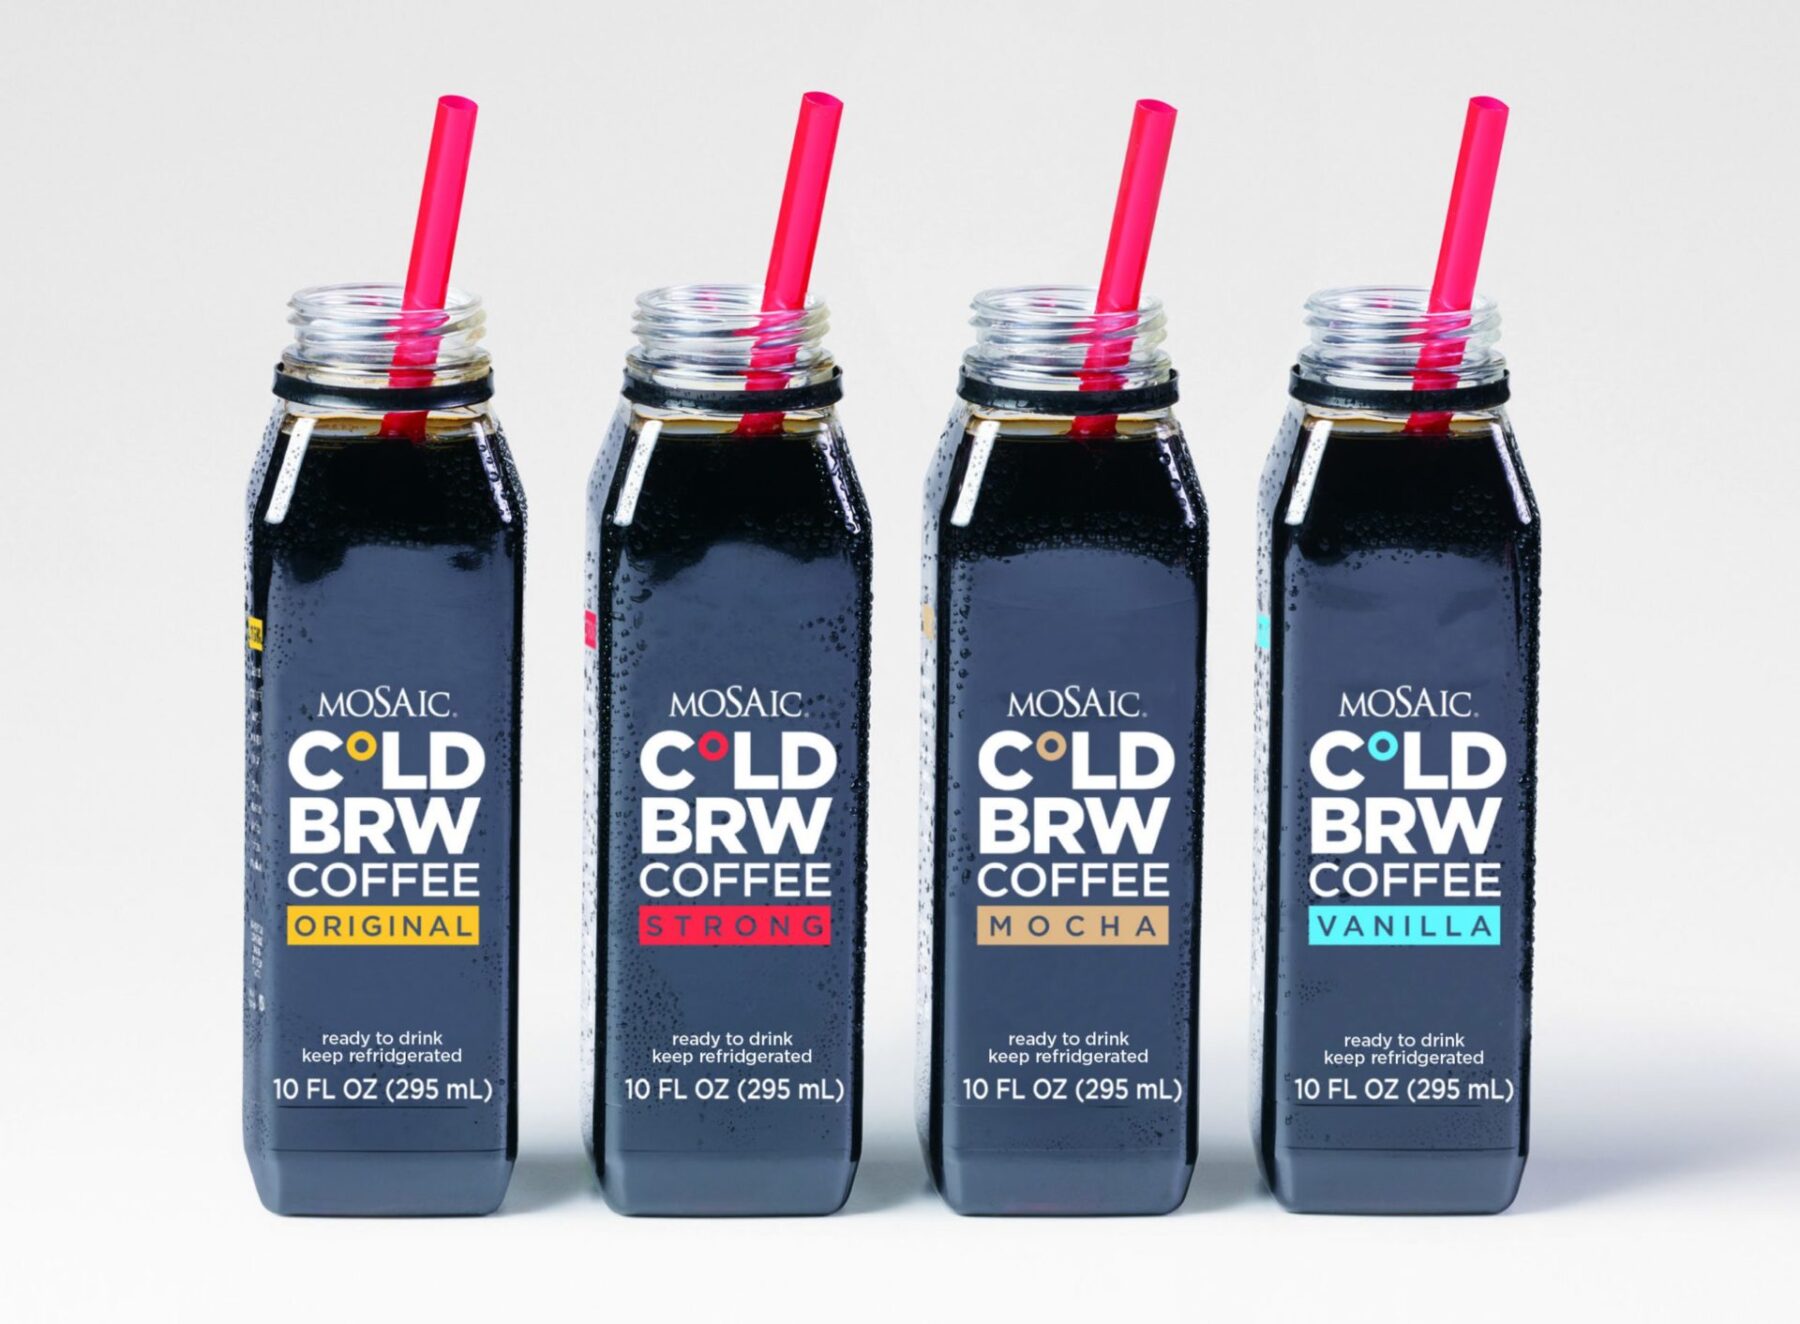 Mosaic Cold Brew Coffee Package Design